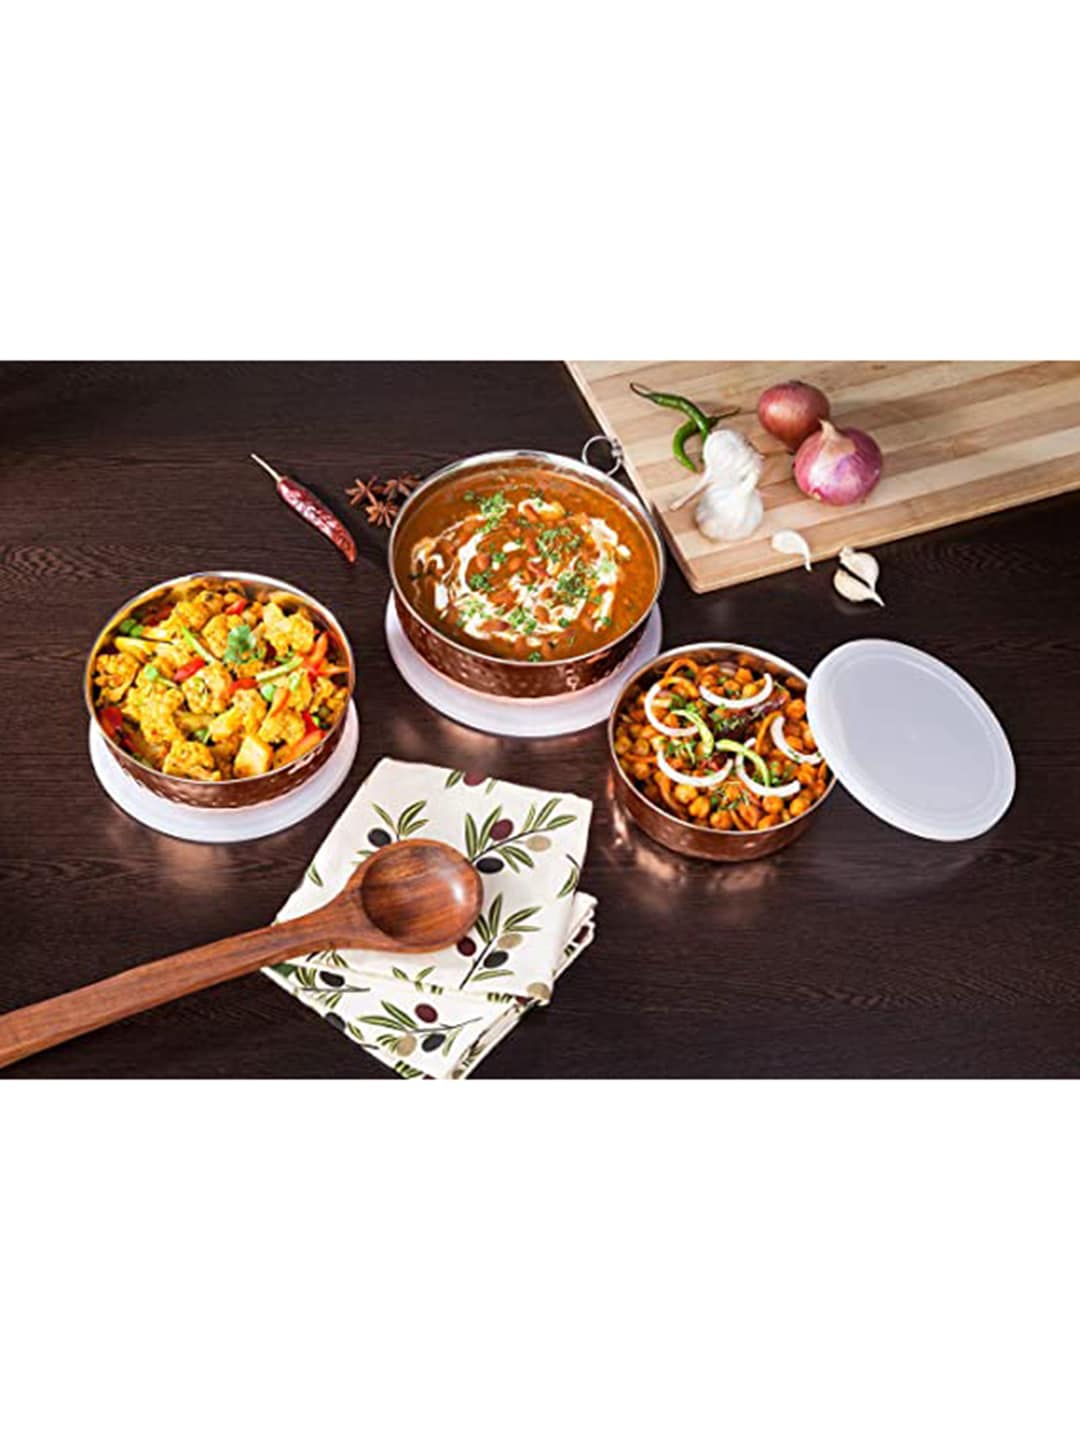 SignoraWare Set Of 3 Copper-Toned Solid Stainless Steel Containers Price in India